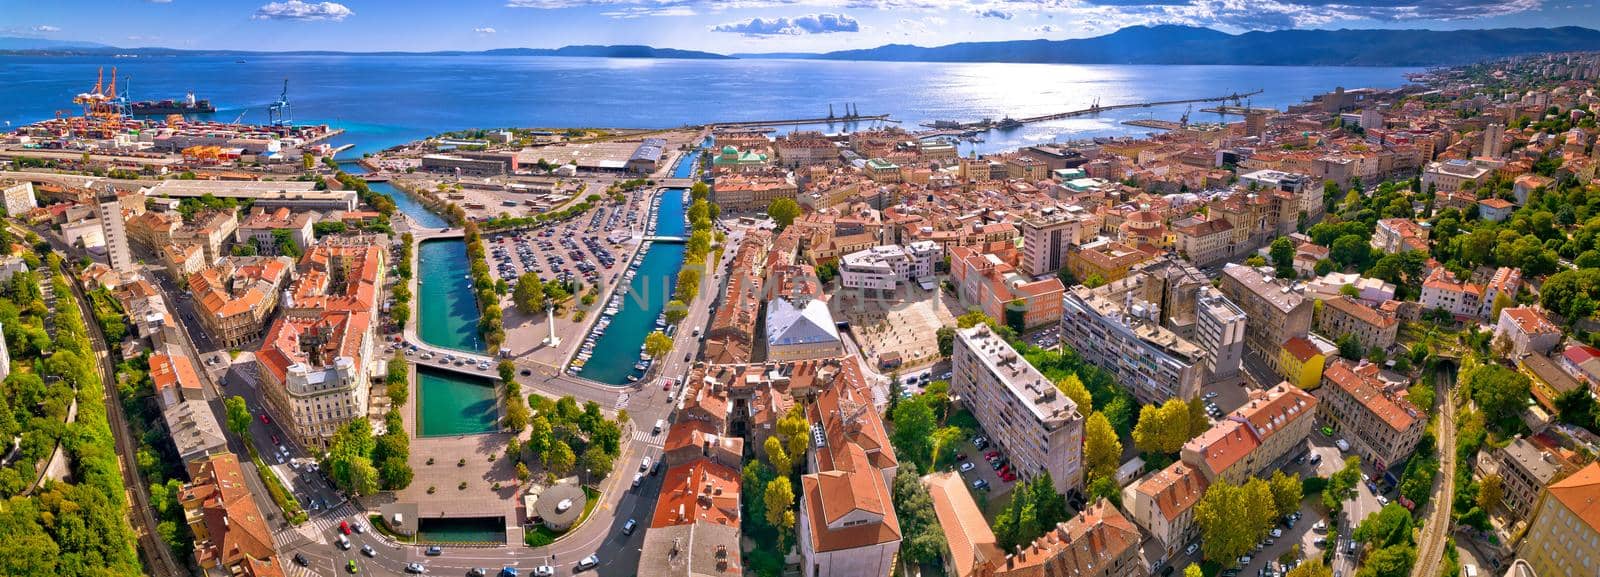 City of Rijeka waterfront and rooftops aerial panoramic view by xbrchx